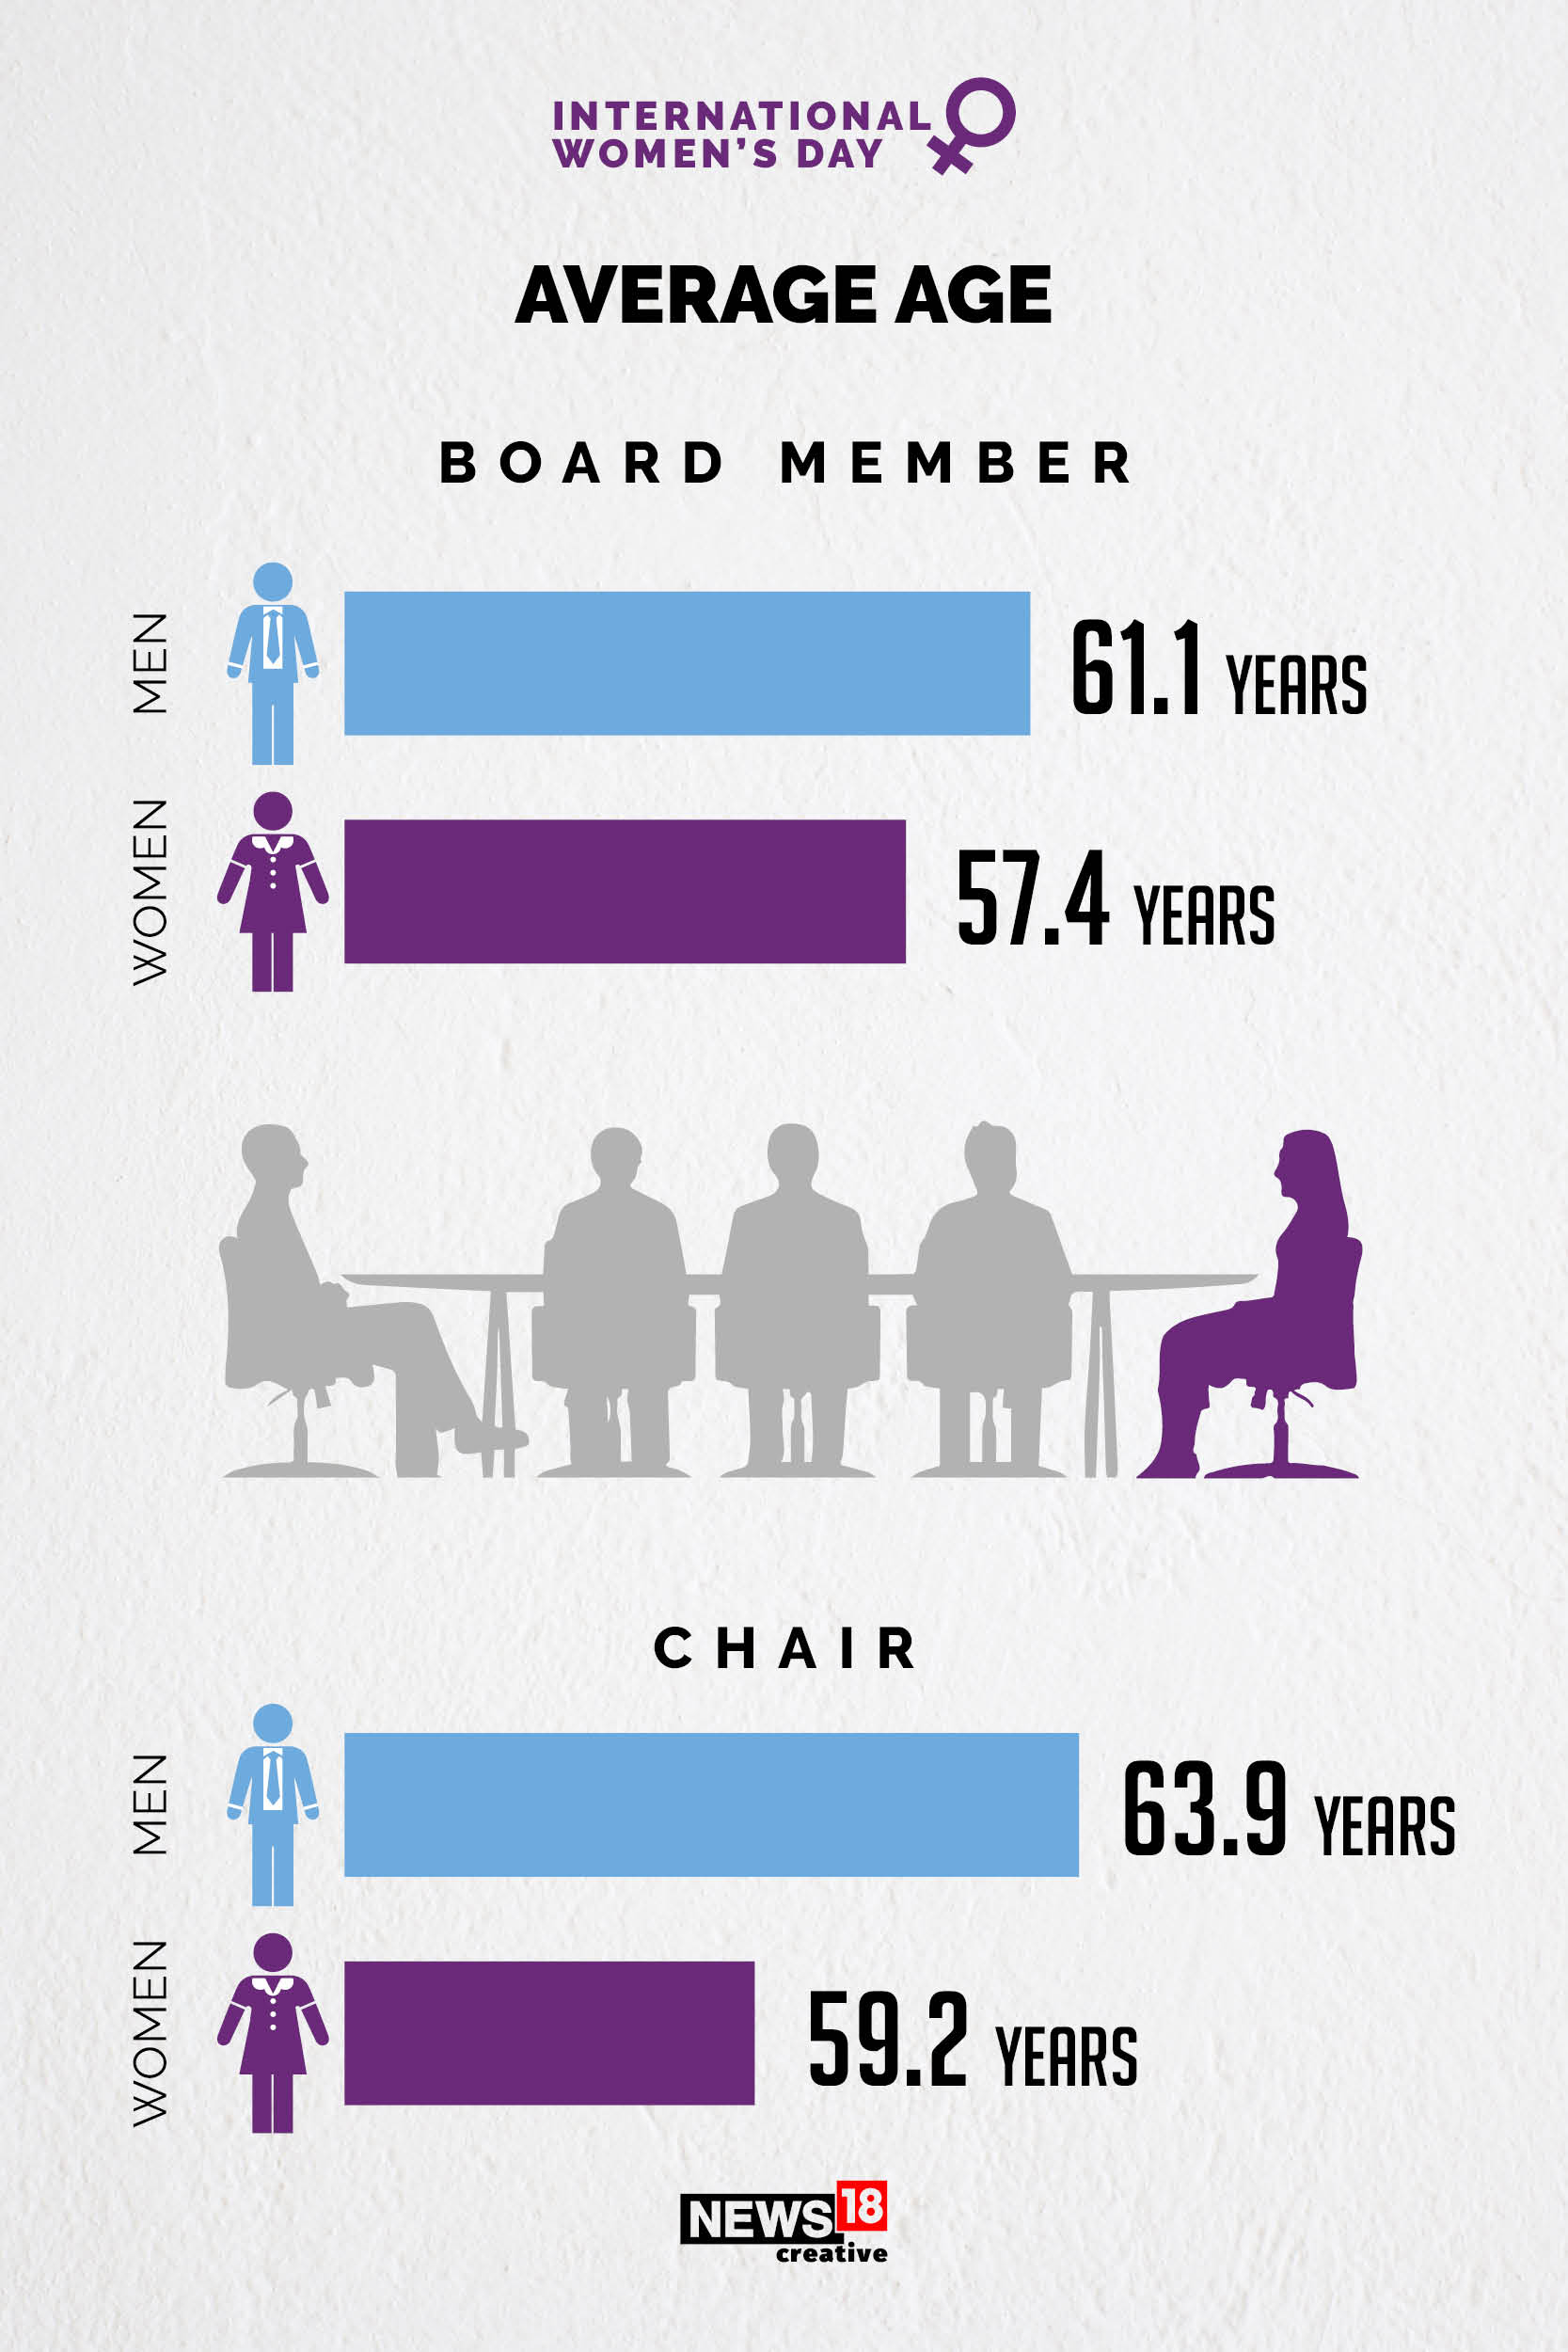 Women are taking up more leadership roles but not in the boardroom